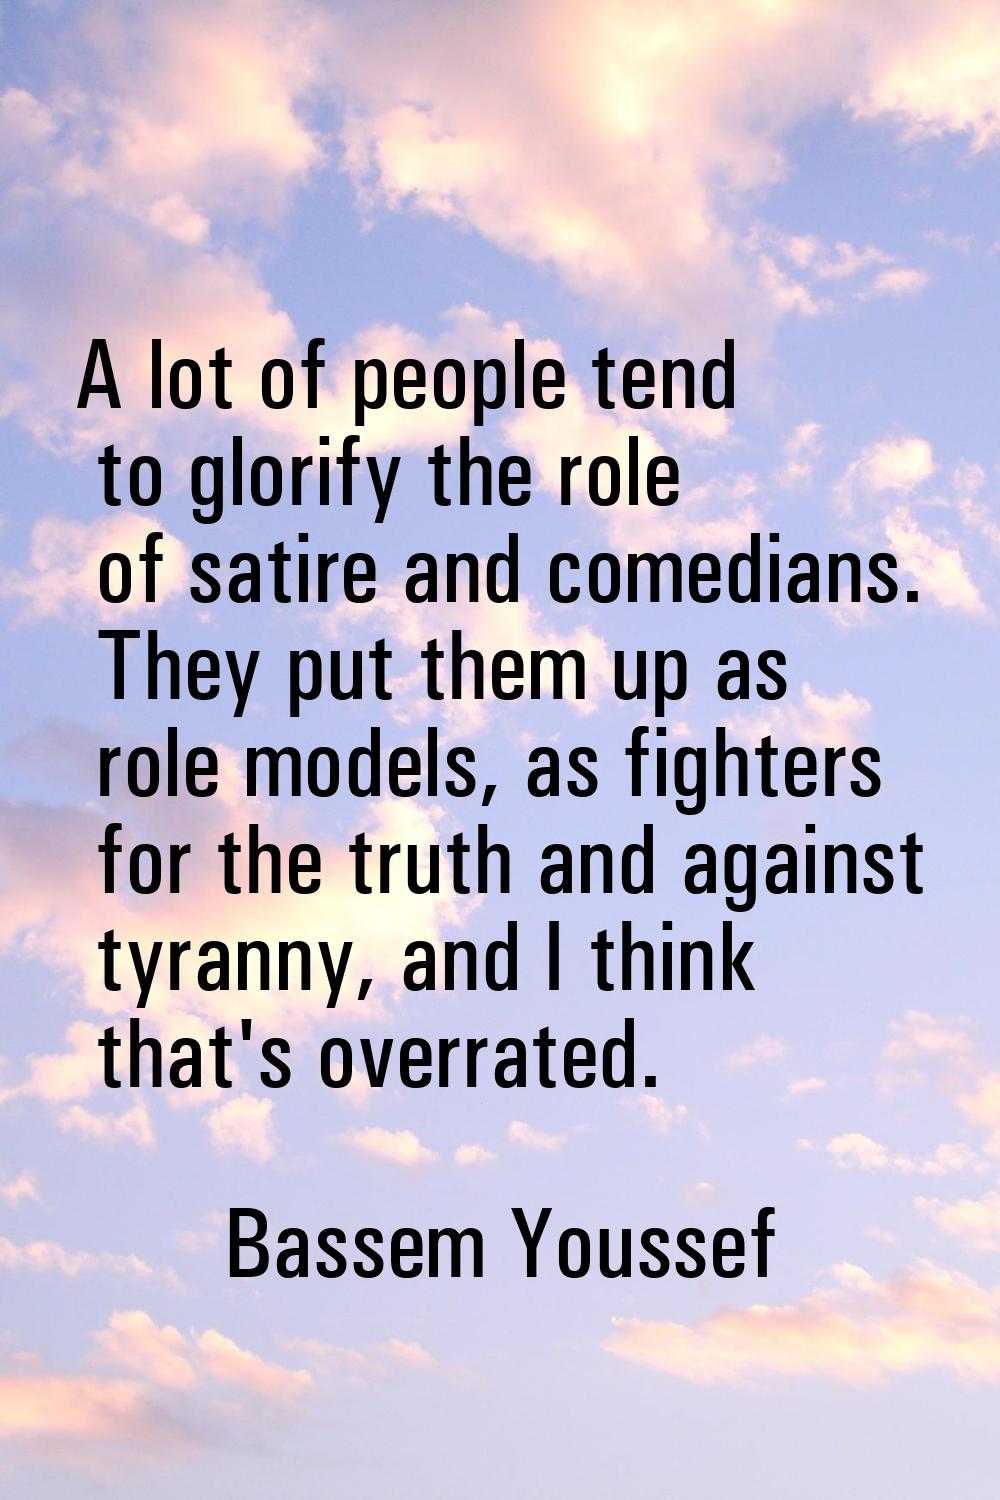 A lot of people tend to glorify the role of satire and comedians. They put them up as role models, 